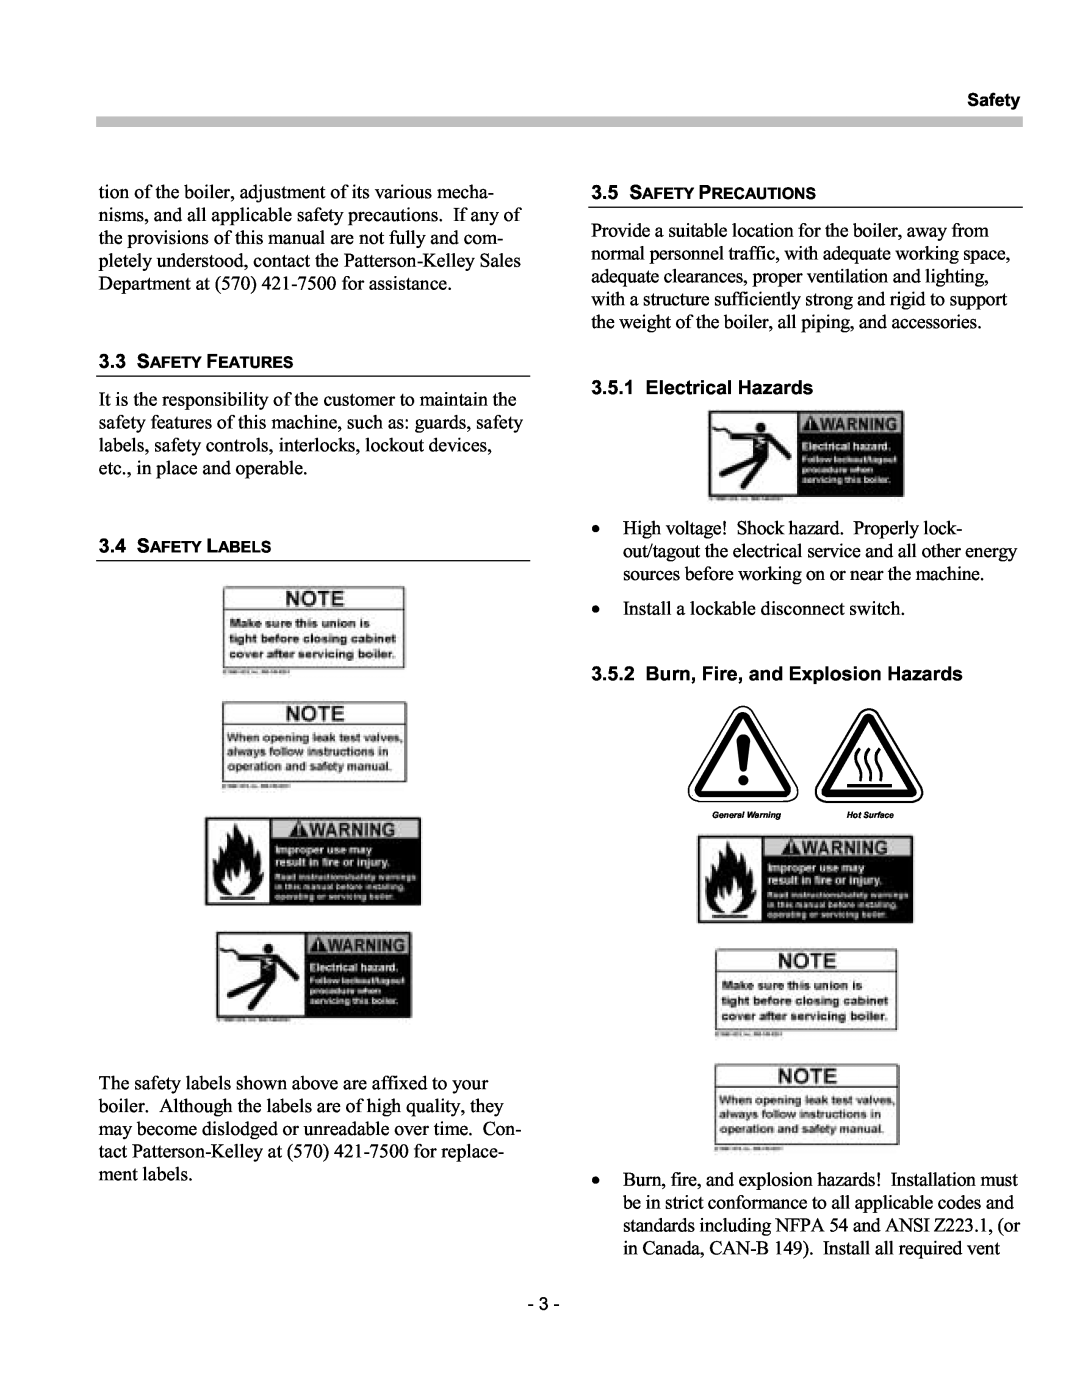 Patterson-Kelley TBIG-03 owner manual Electrical Hazards, Burn, Fire, and Explosion Hazards 